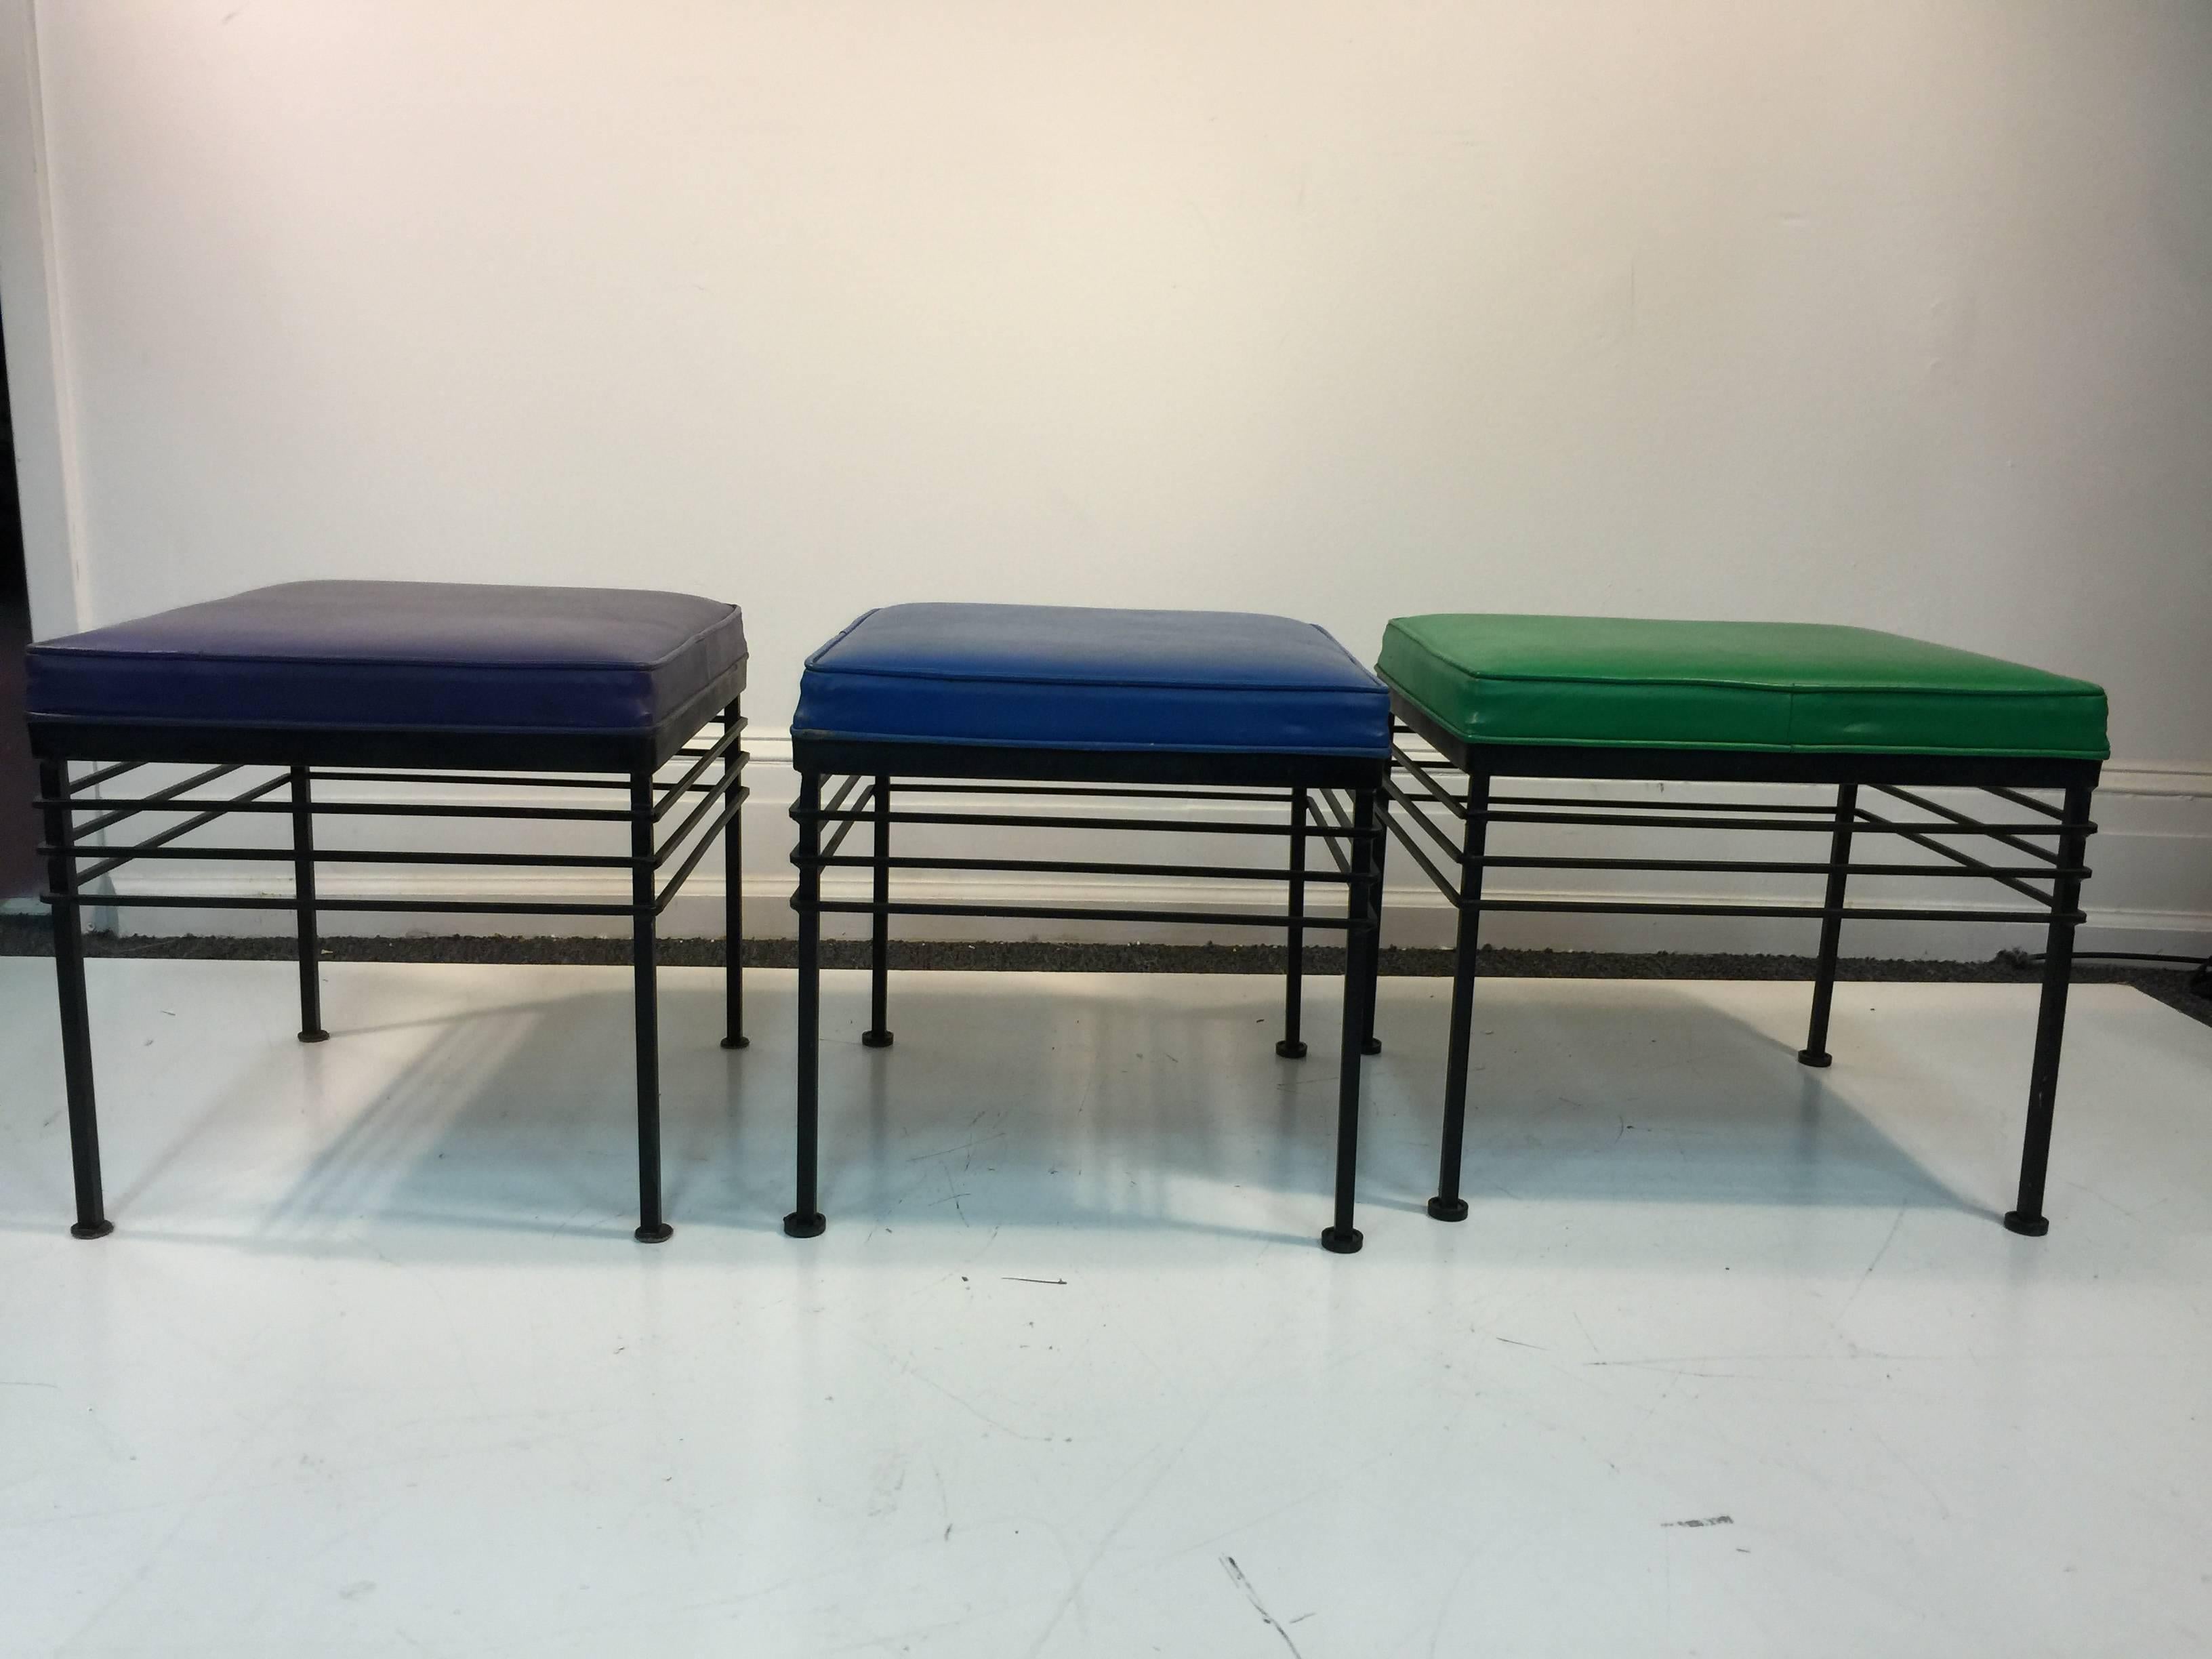 A super trio of stools or benches in blue, green, and purple vinyl upholstery with wrought iron bases in the manner of Paul McCobb, circa 1970.